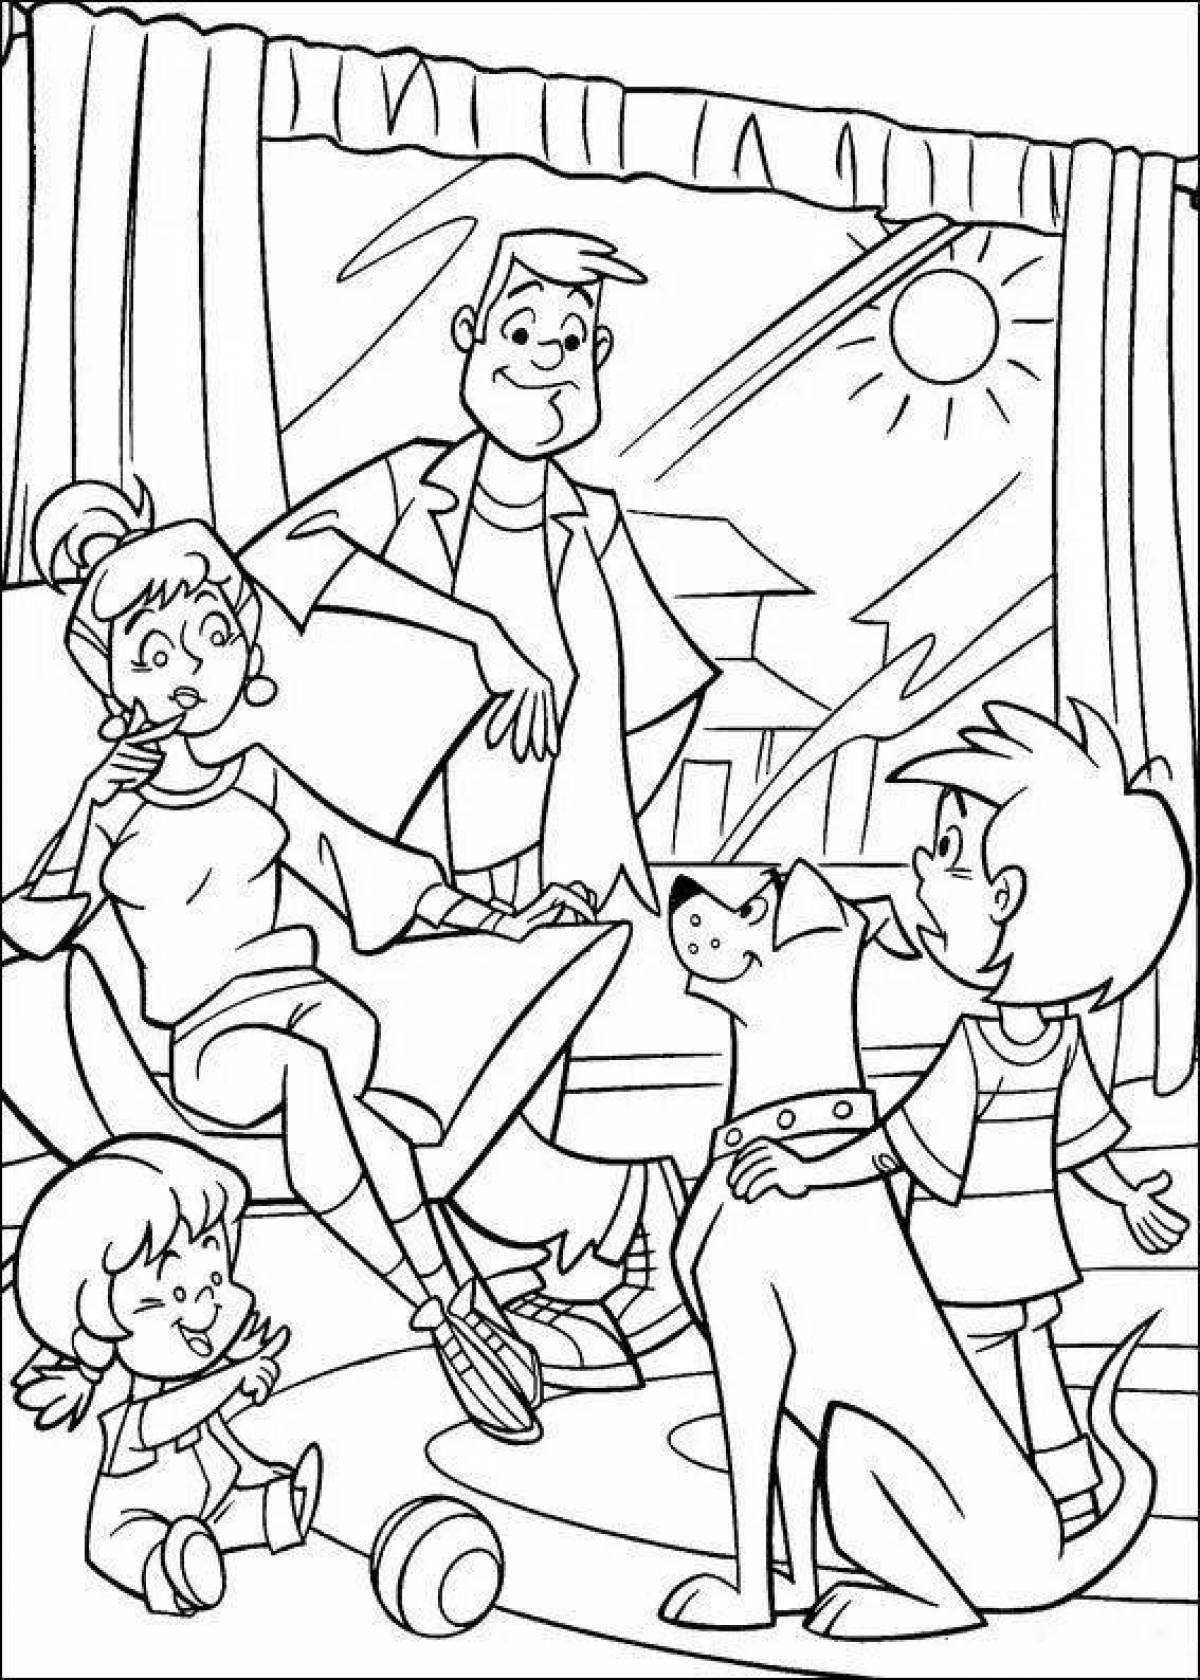 Coloring page violent matchmakers